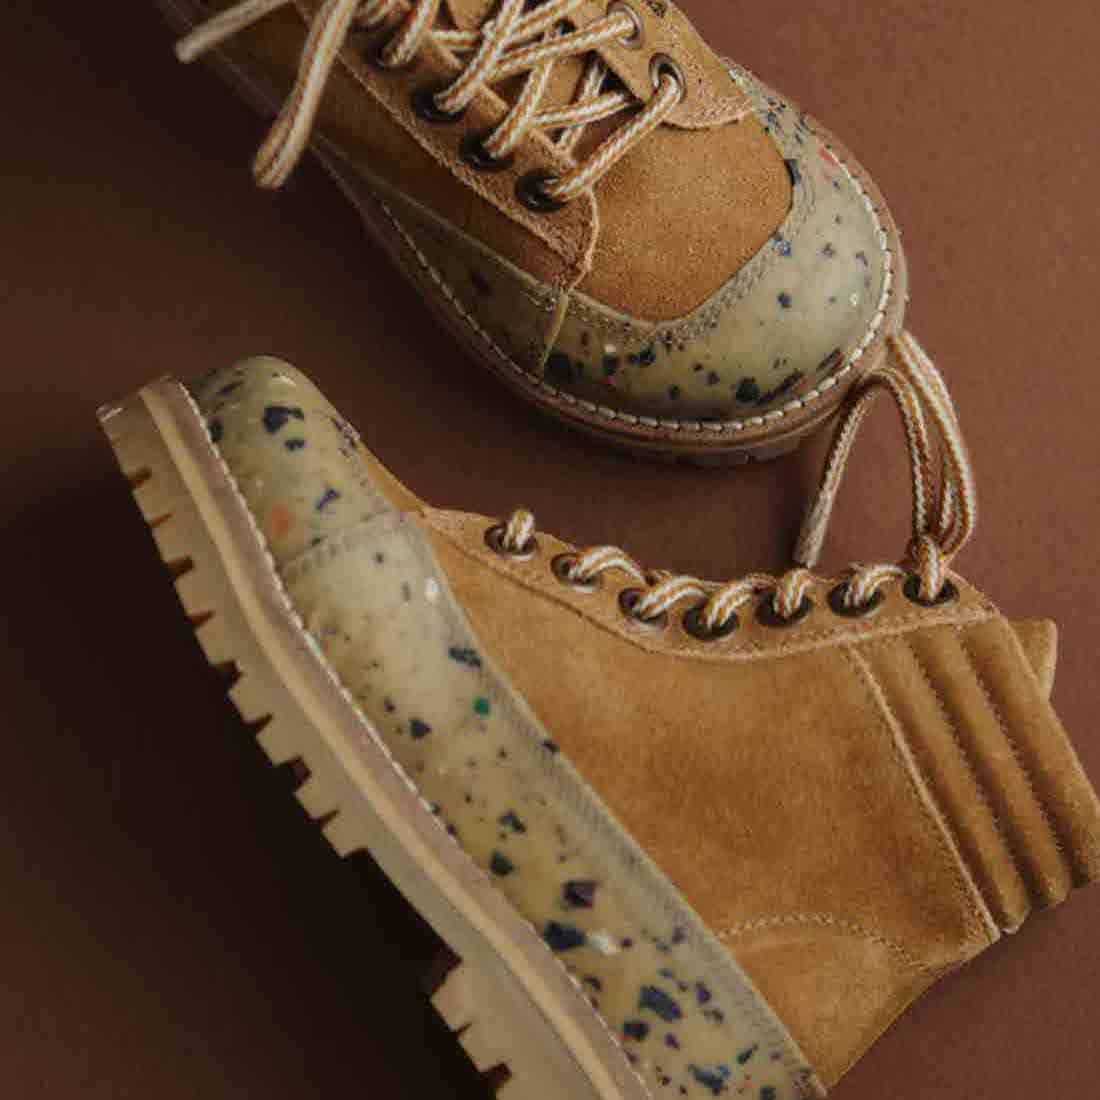 Rugged_Boot-Amber suede-Petit_Nord